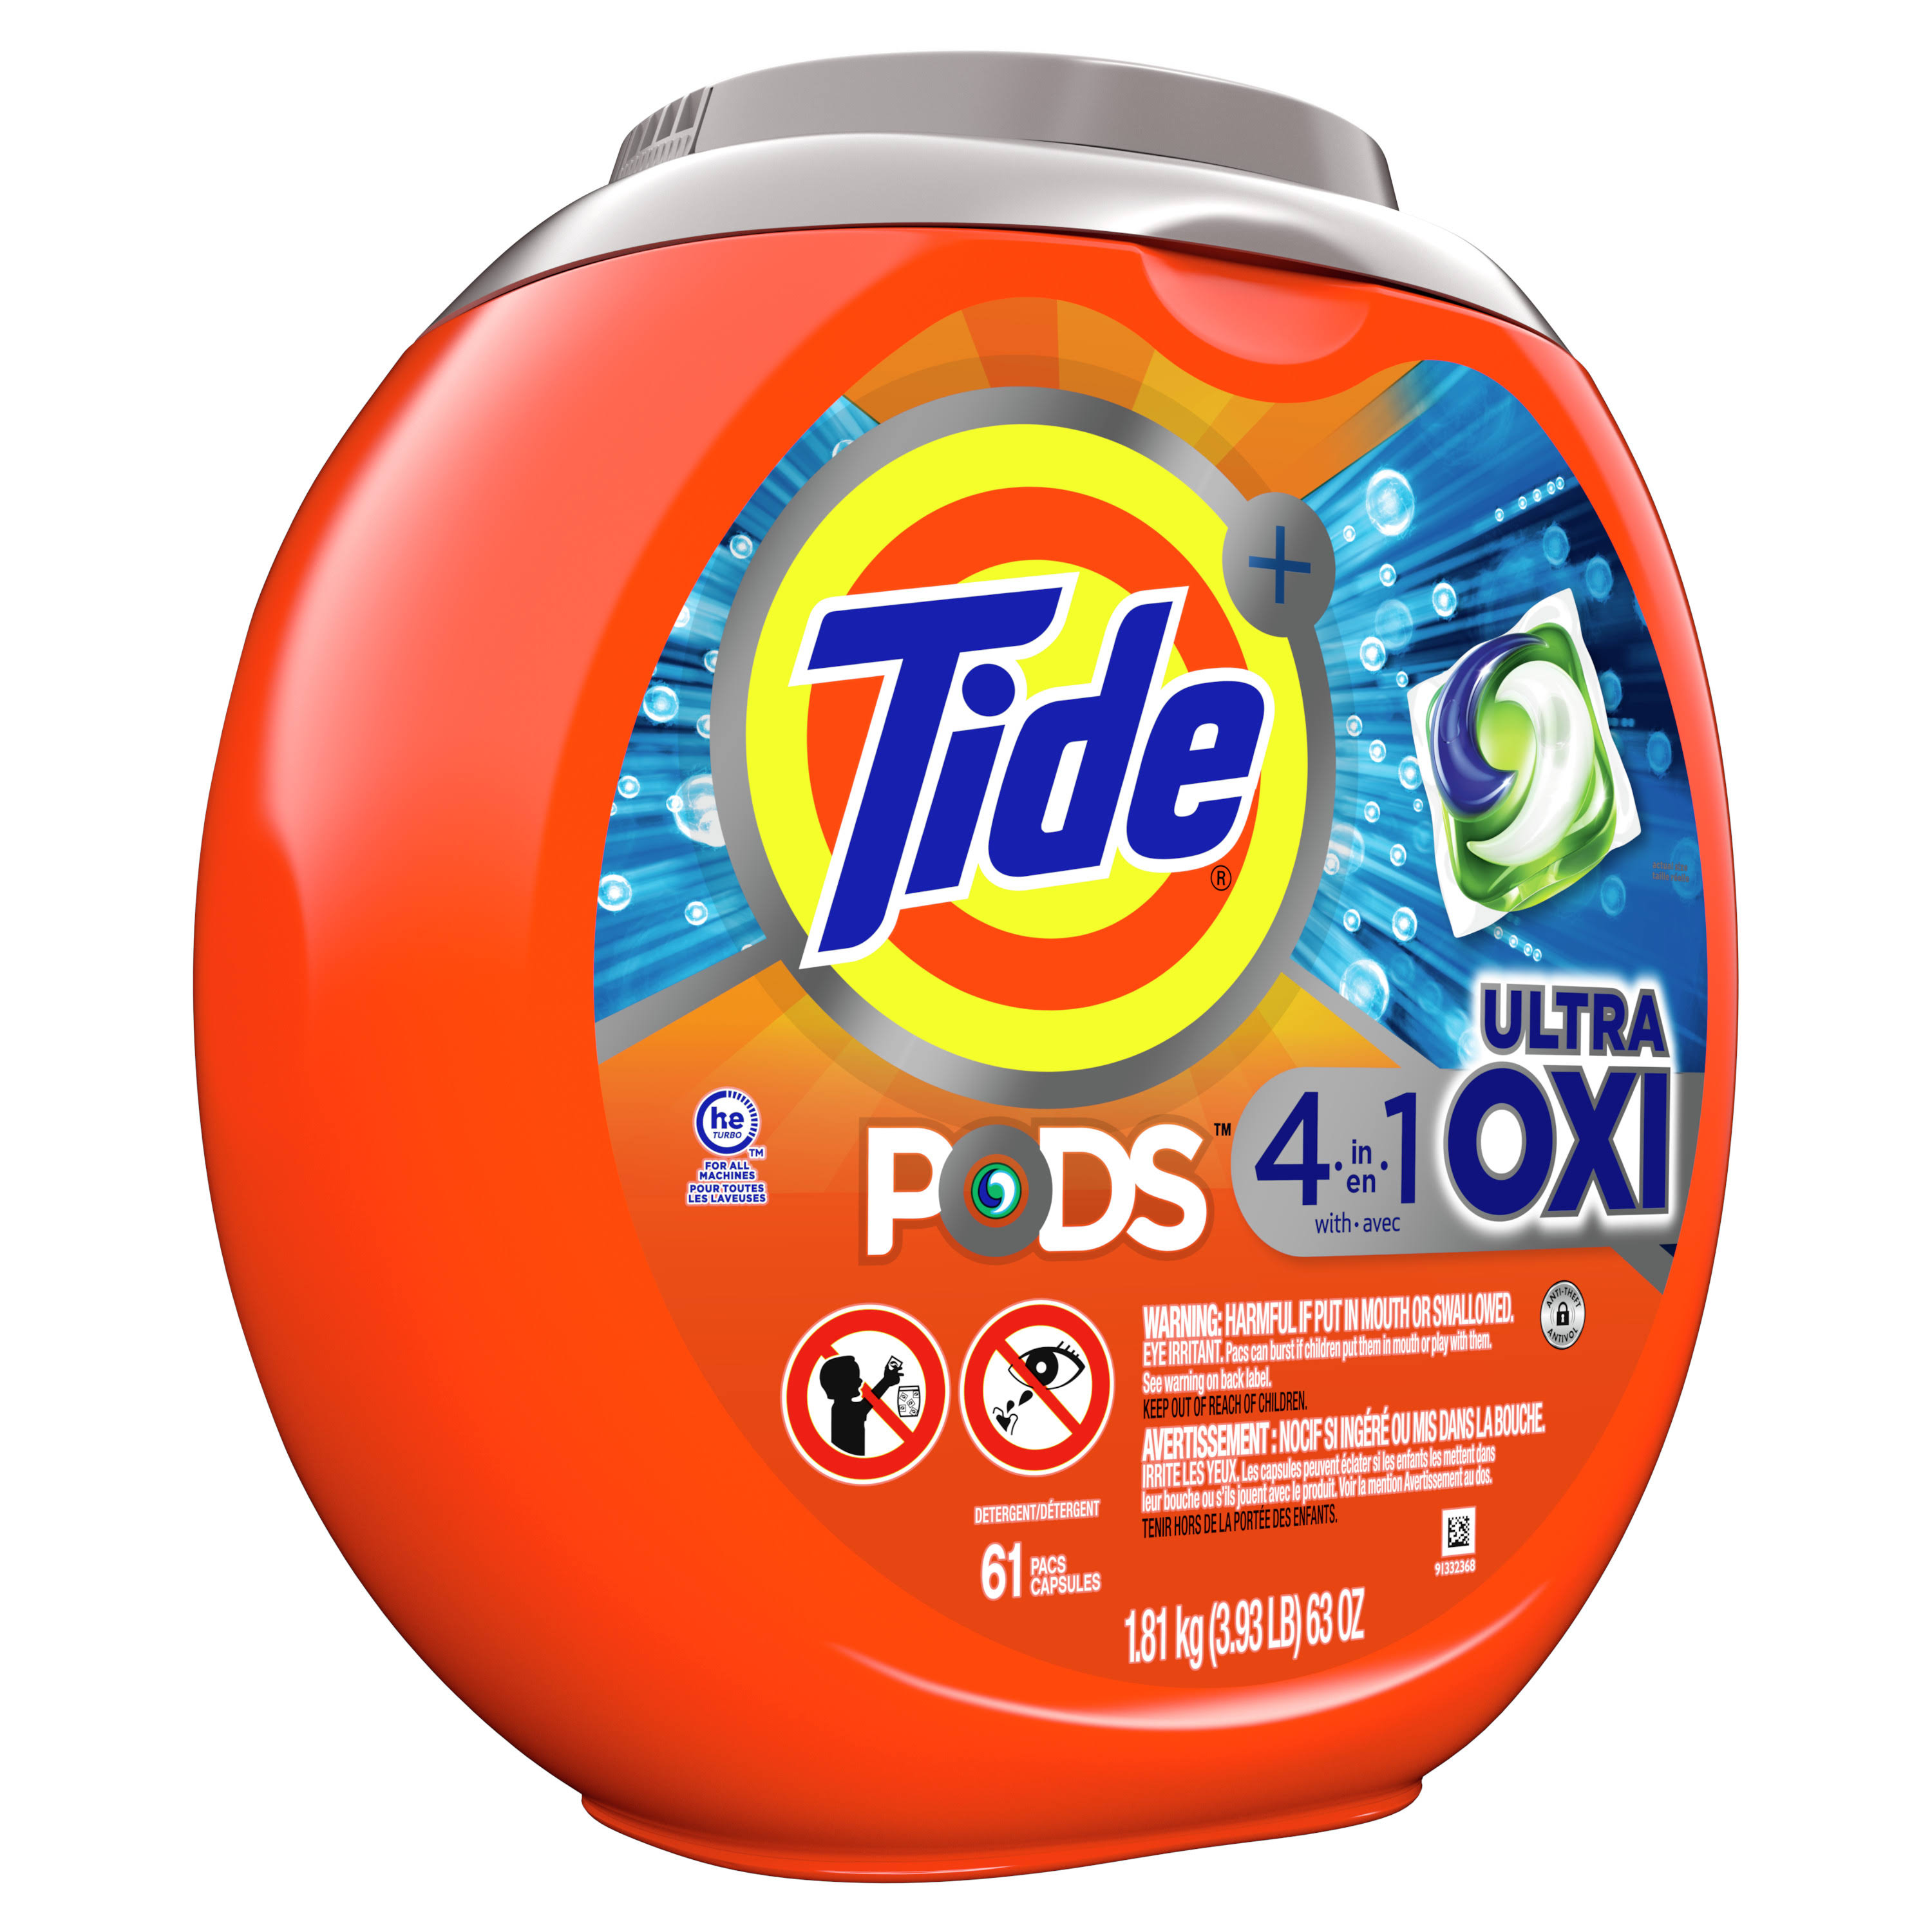 Tide Pods 4 in 1 Ultra Oxi Laundry Detergent Soap Pods, High Efficiency (HE), 61 Count